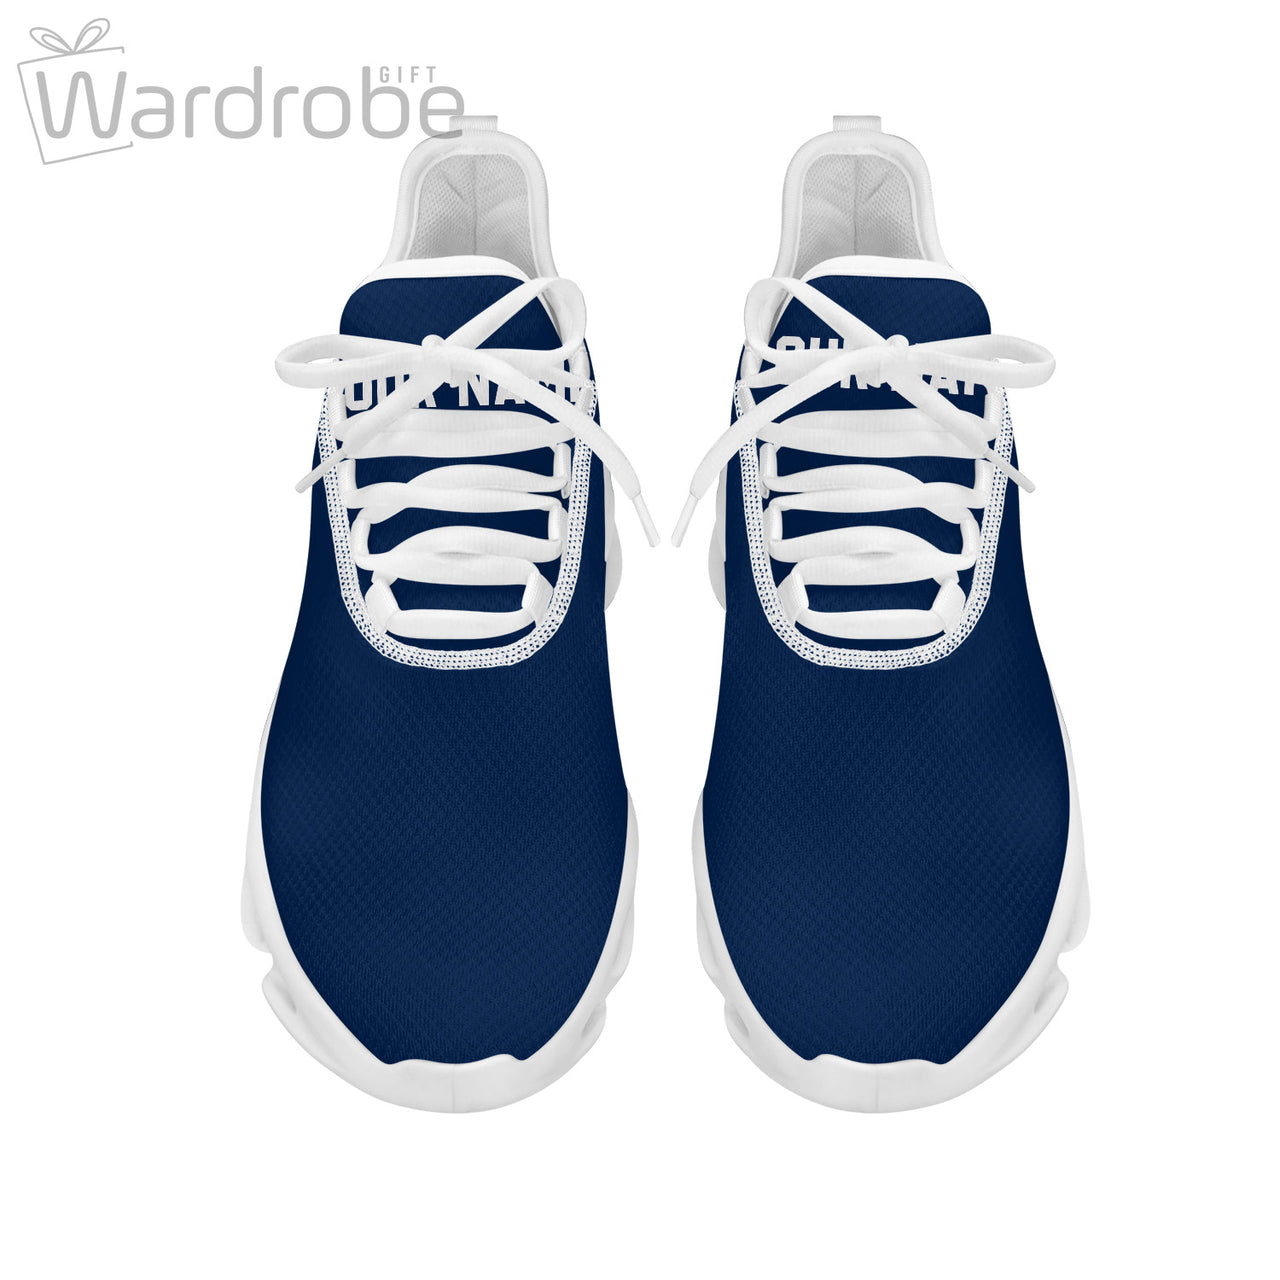 Personalized Name Chunky Sneaker Shoes